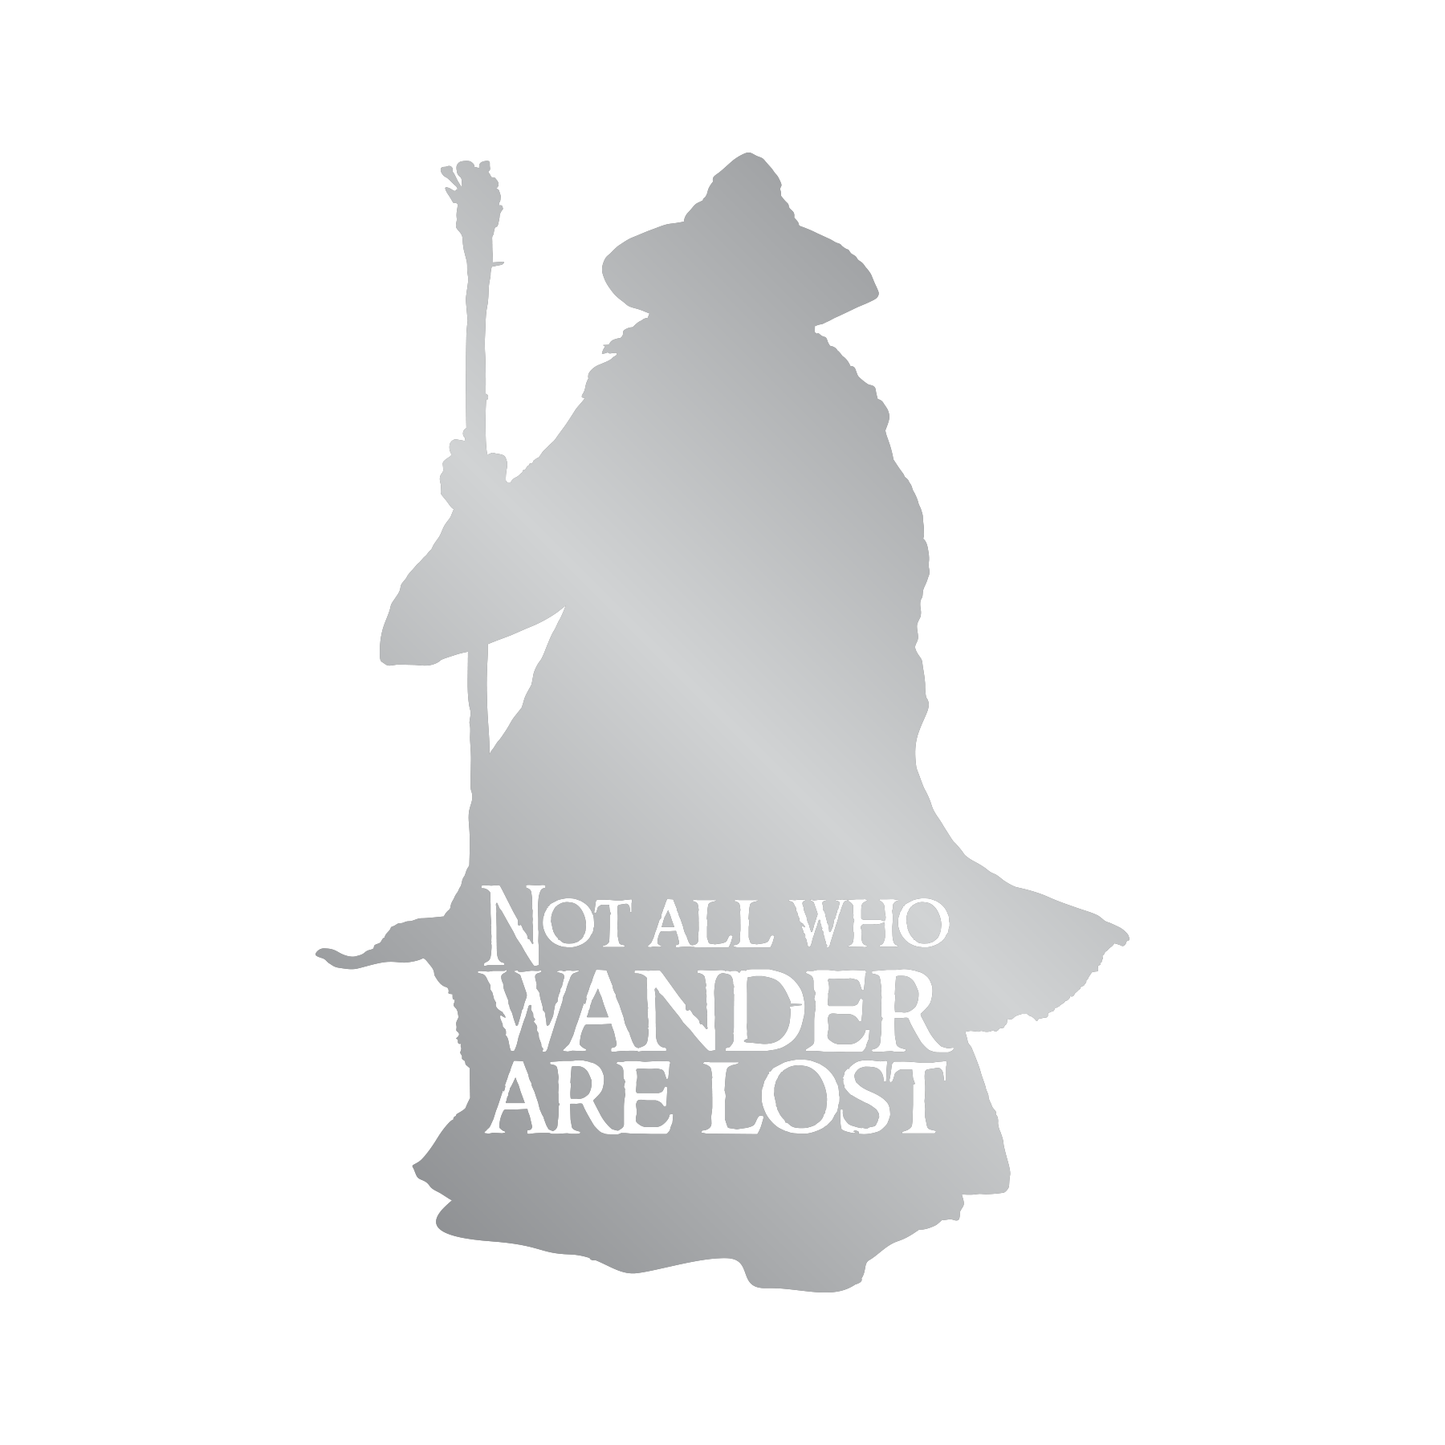 LOTR Lord of the Rings Gandalf Silhouette Not All Who Wander are Lost